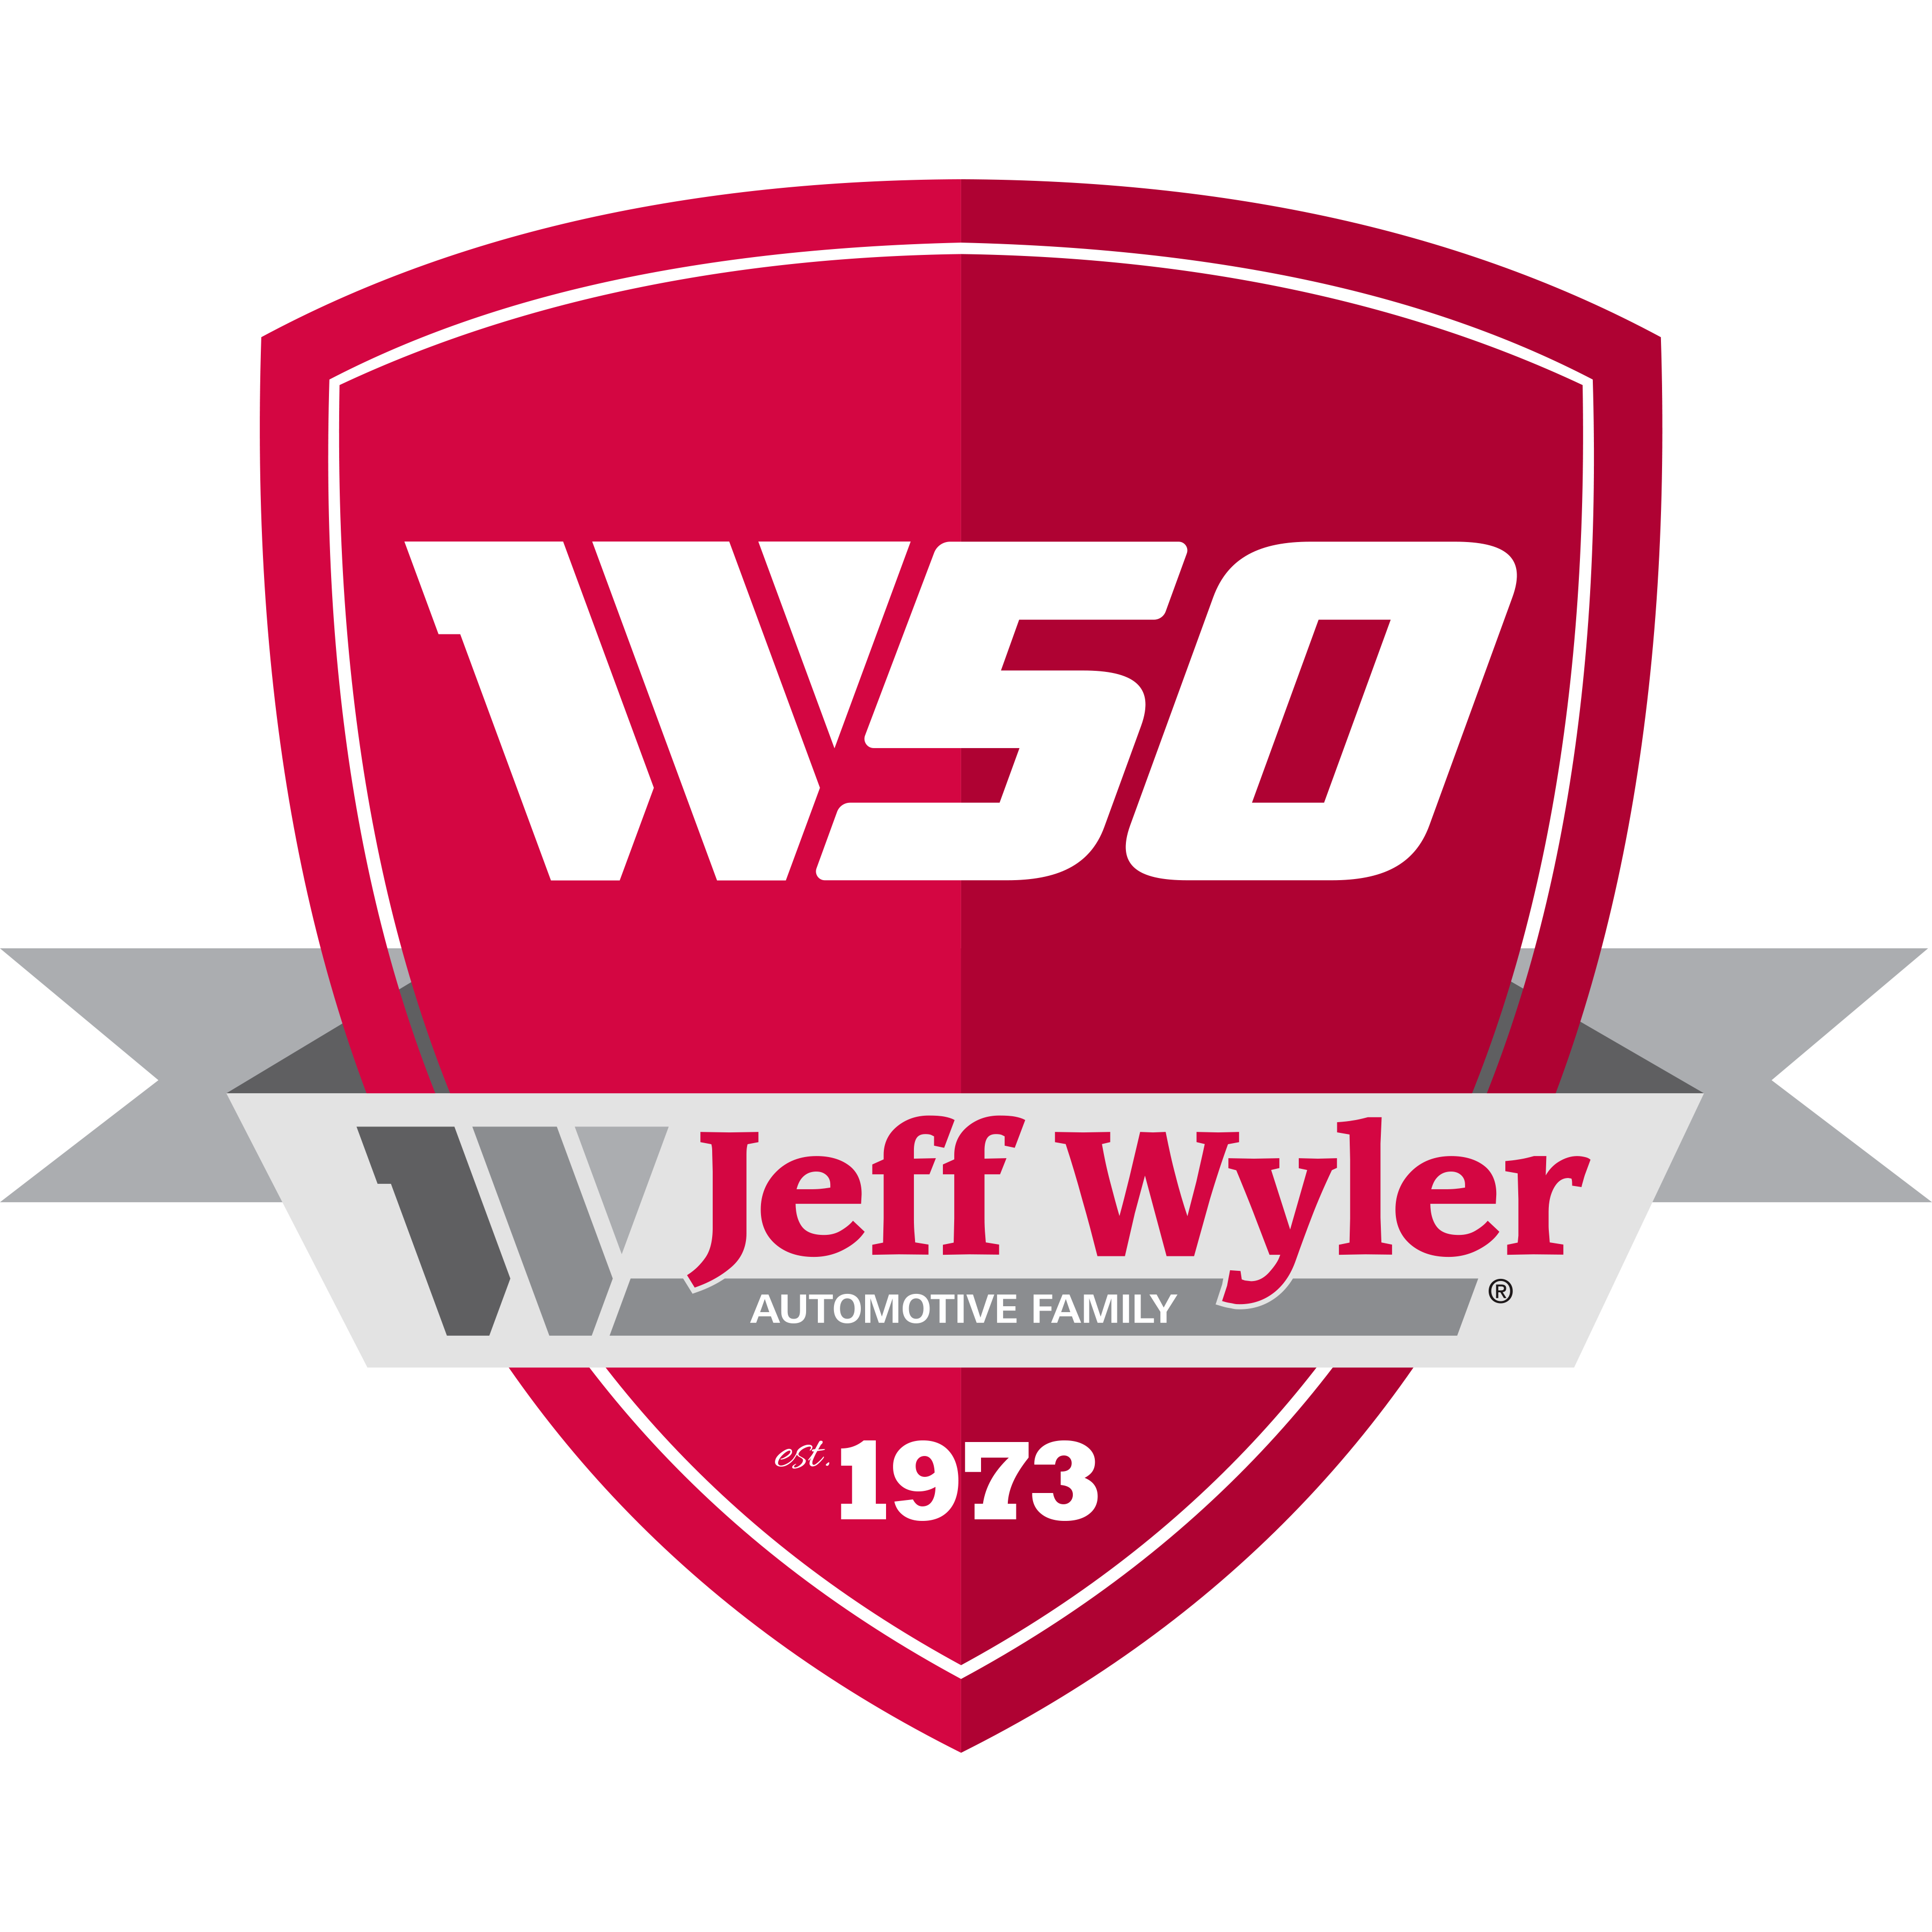 Jeff Wyler Chrysler Jeep Dodge Ram of Ft Thomas Parts - Fort Thomas, KY 41075 - (859)442-3347 | ShowMeLocal.com